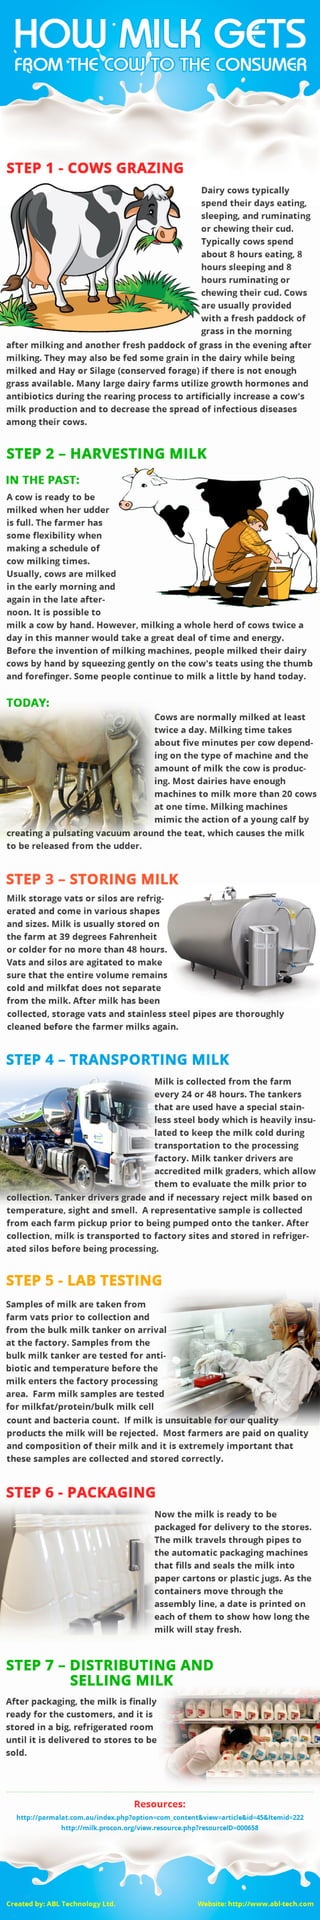 How Milk gets from the Cow to the Consumer Milk processing